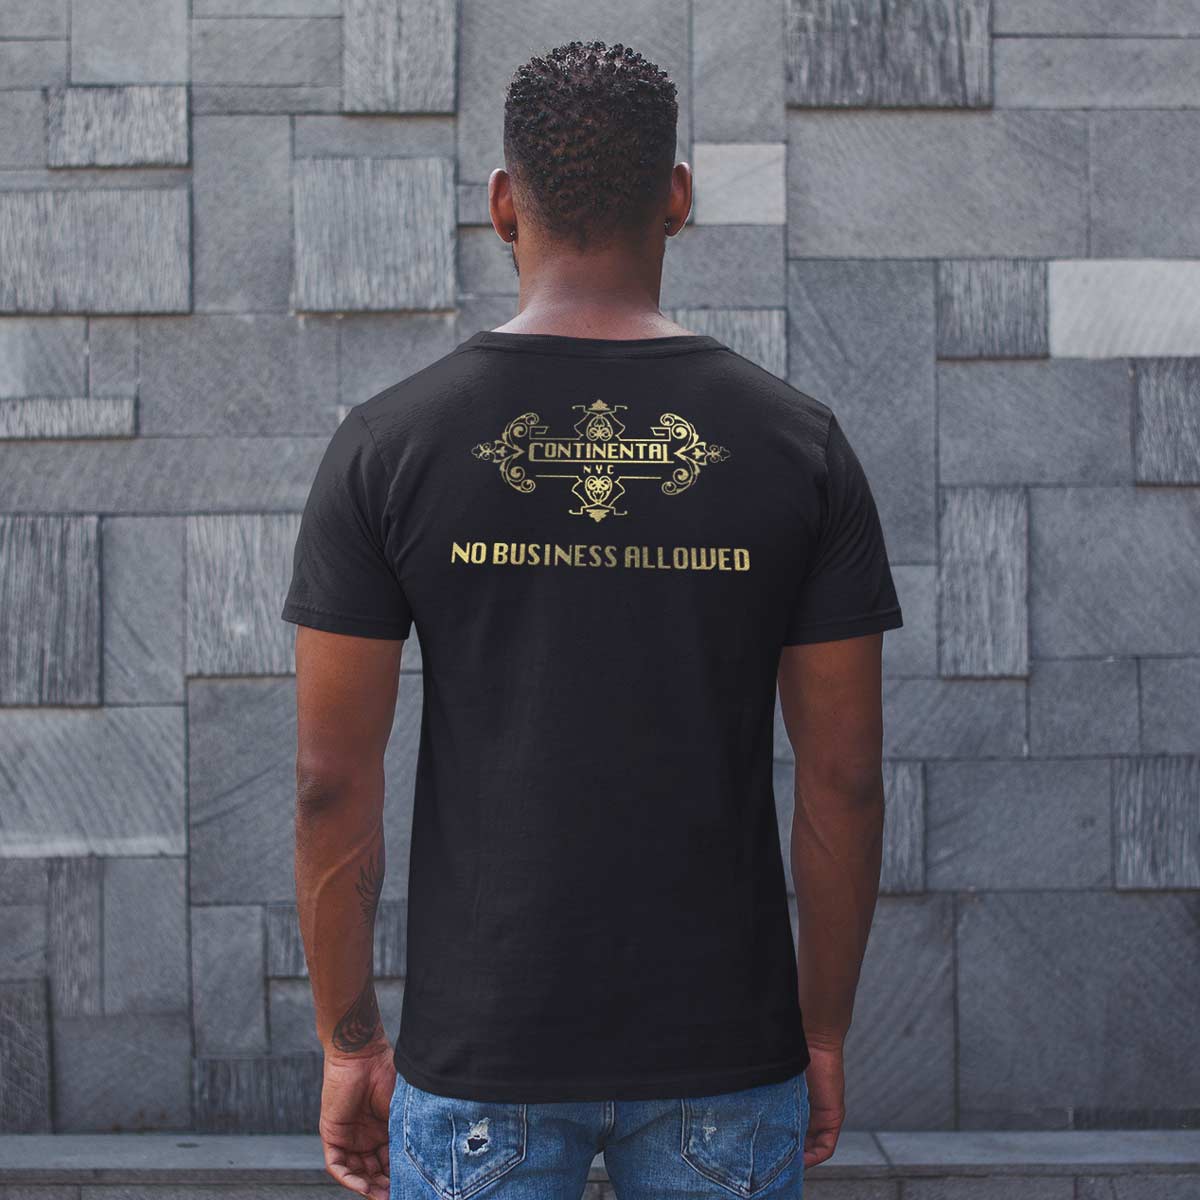 John Wick Official x Hard Rock Adult Fit T-Shirt Continental No Business Allowed image number 3